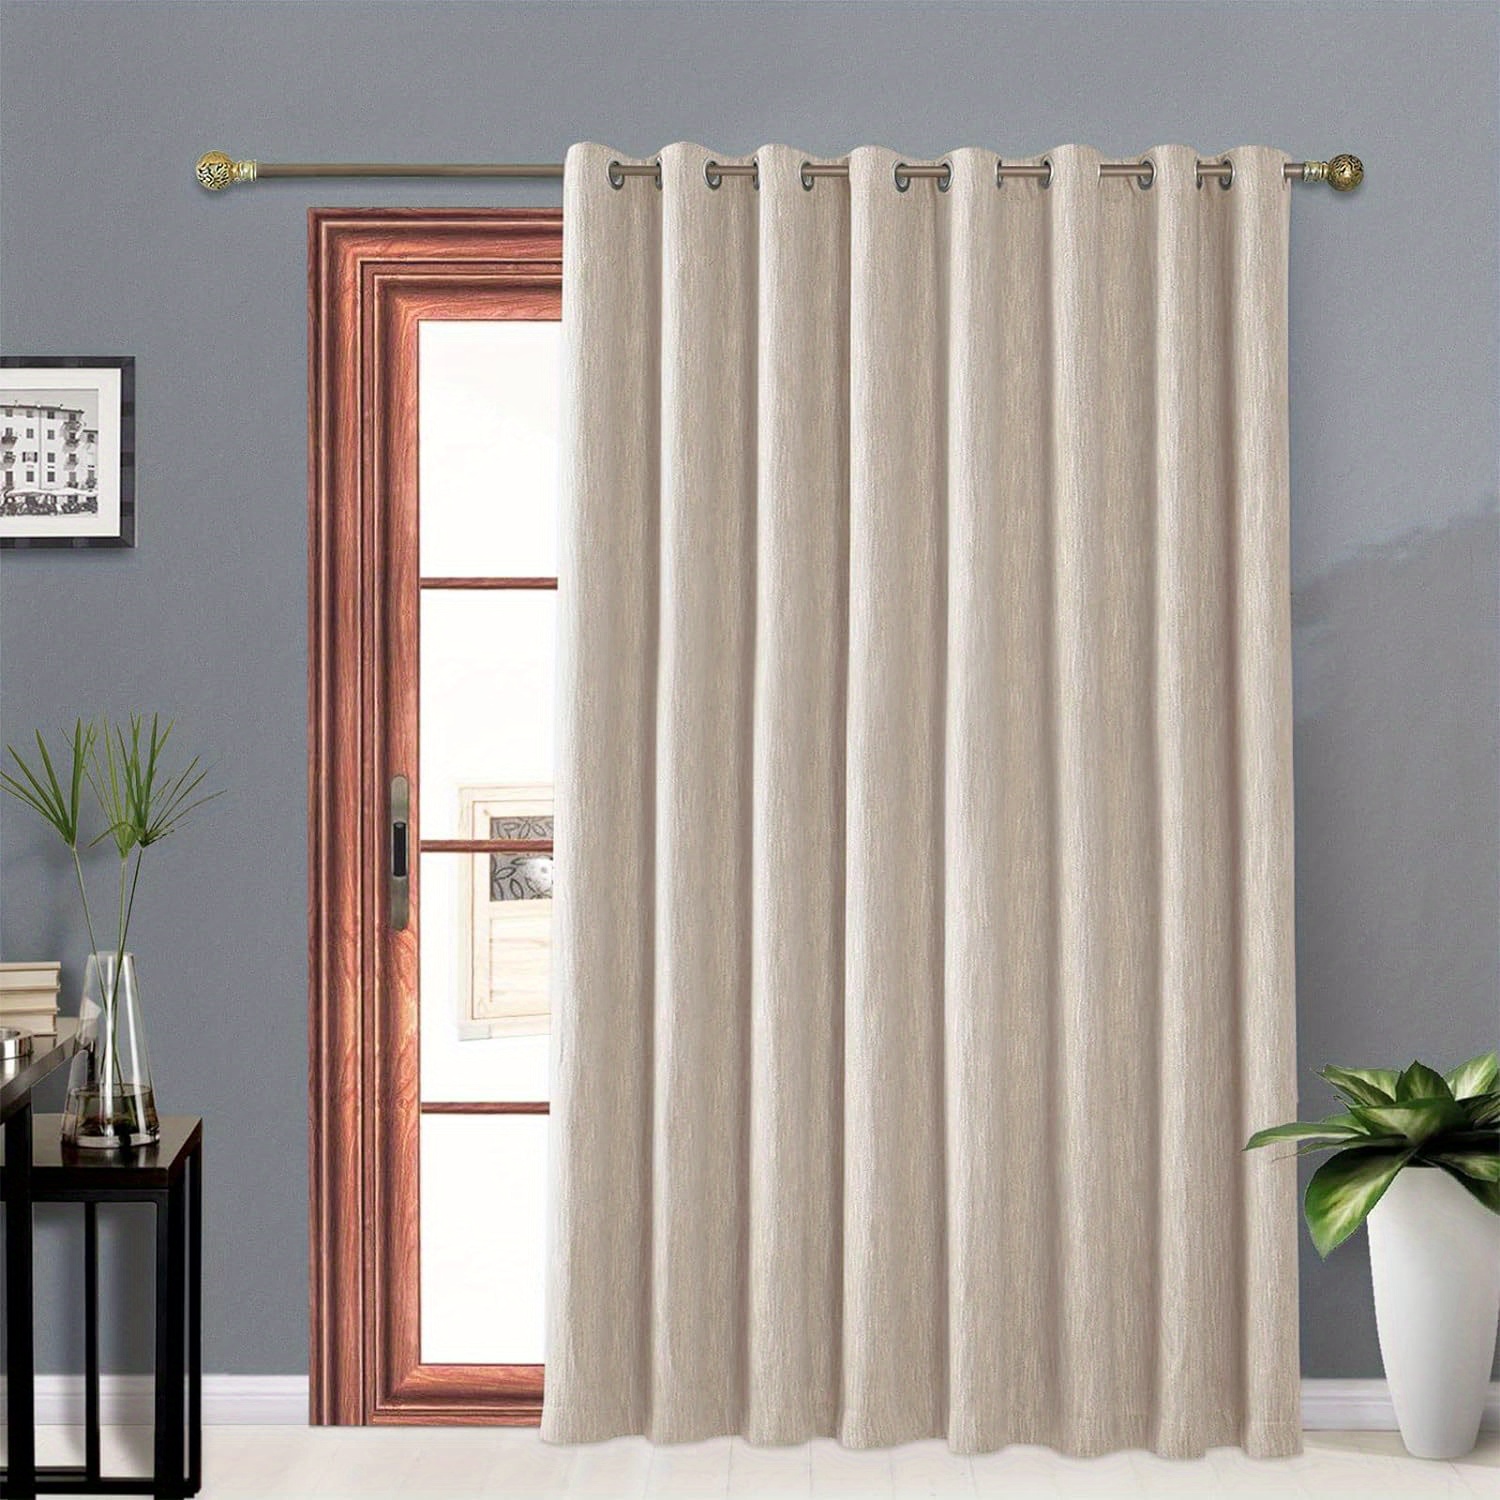 

Beige Cotton Wide Blackout Curtains For Sliding Glass Door Living Room Thermal Insulated Grommet Drapes, (1 Panel)